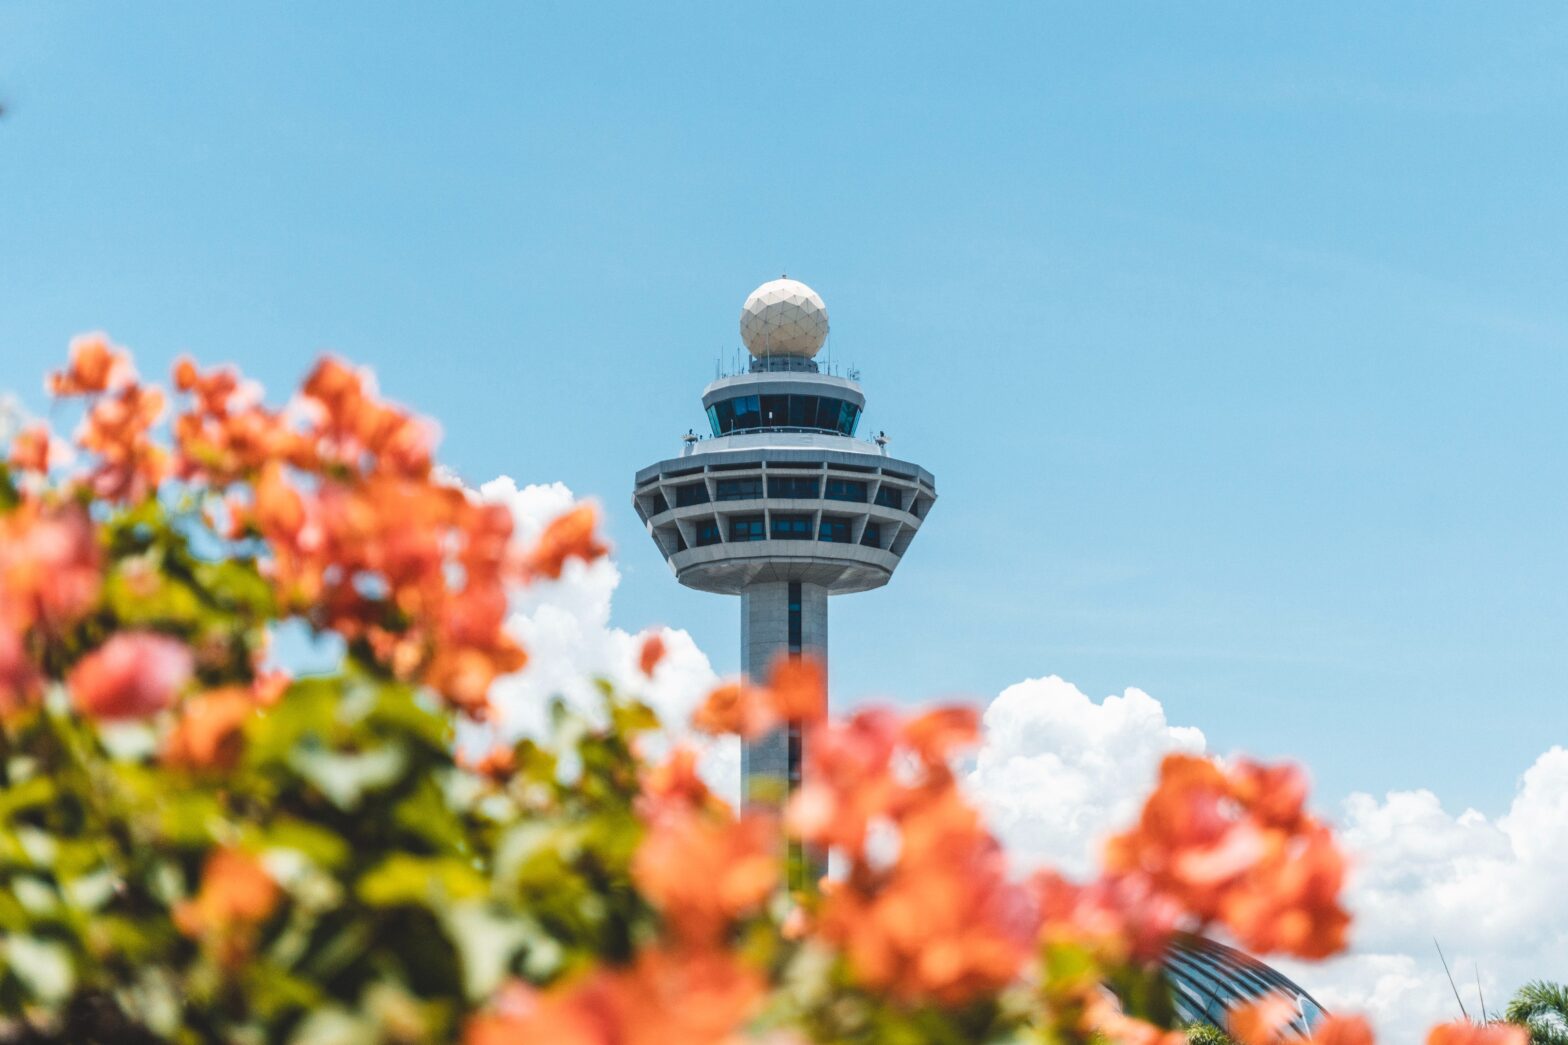 New content partnership with Singapore’s Changi Airport